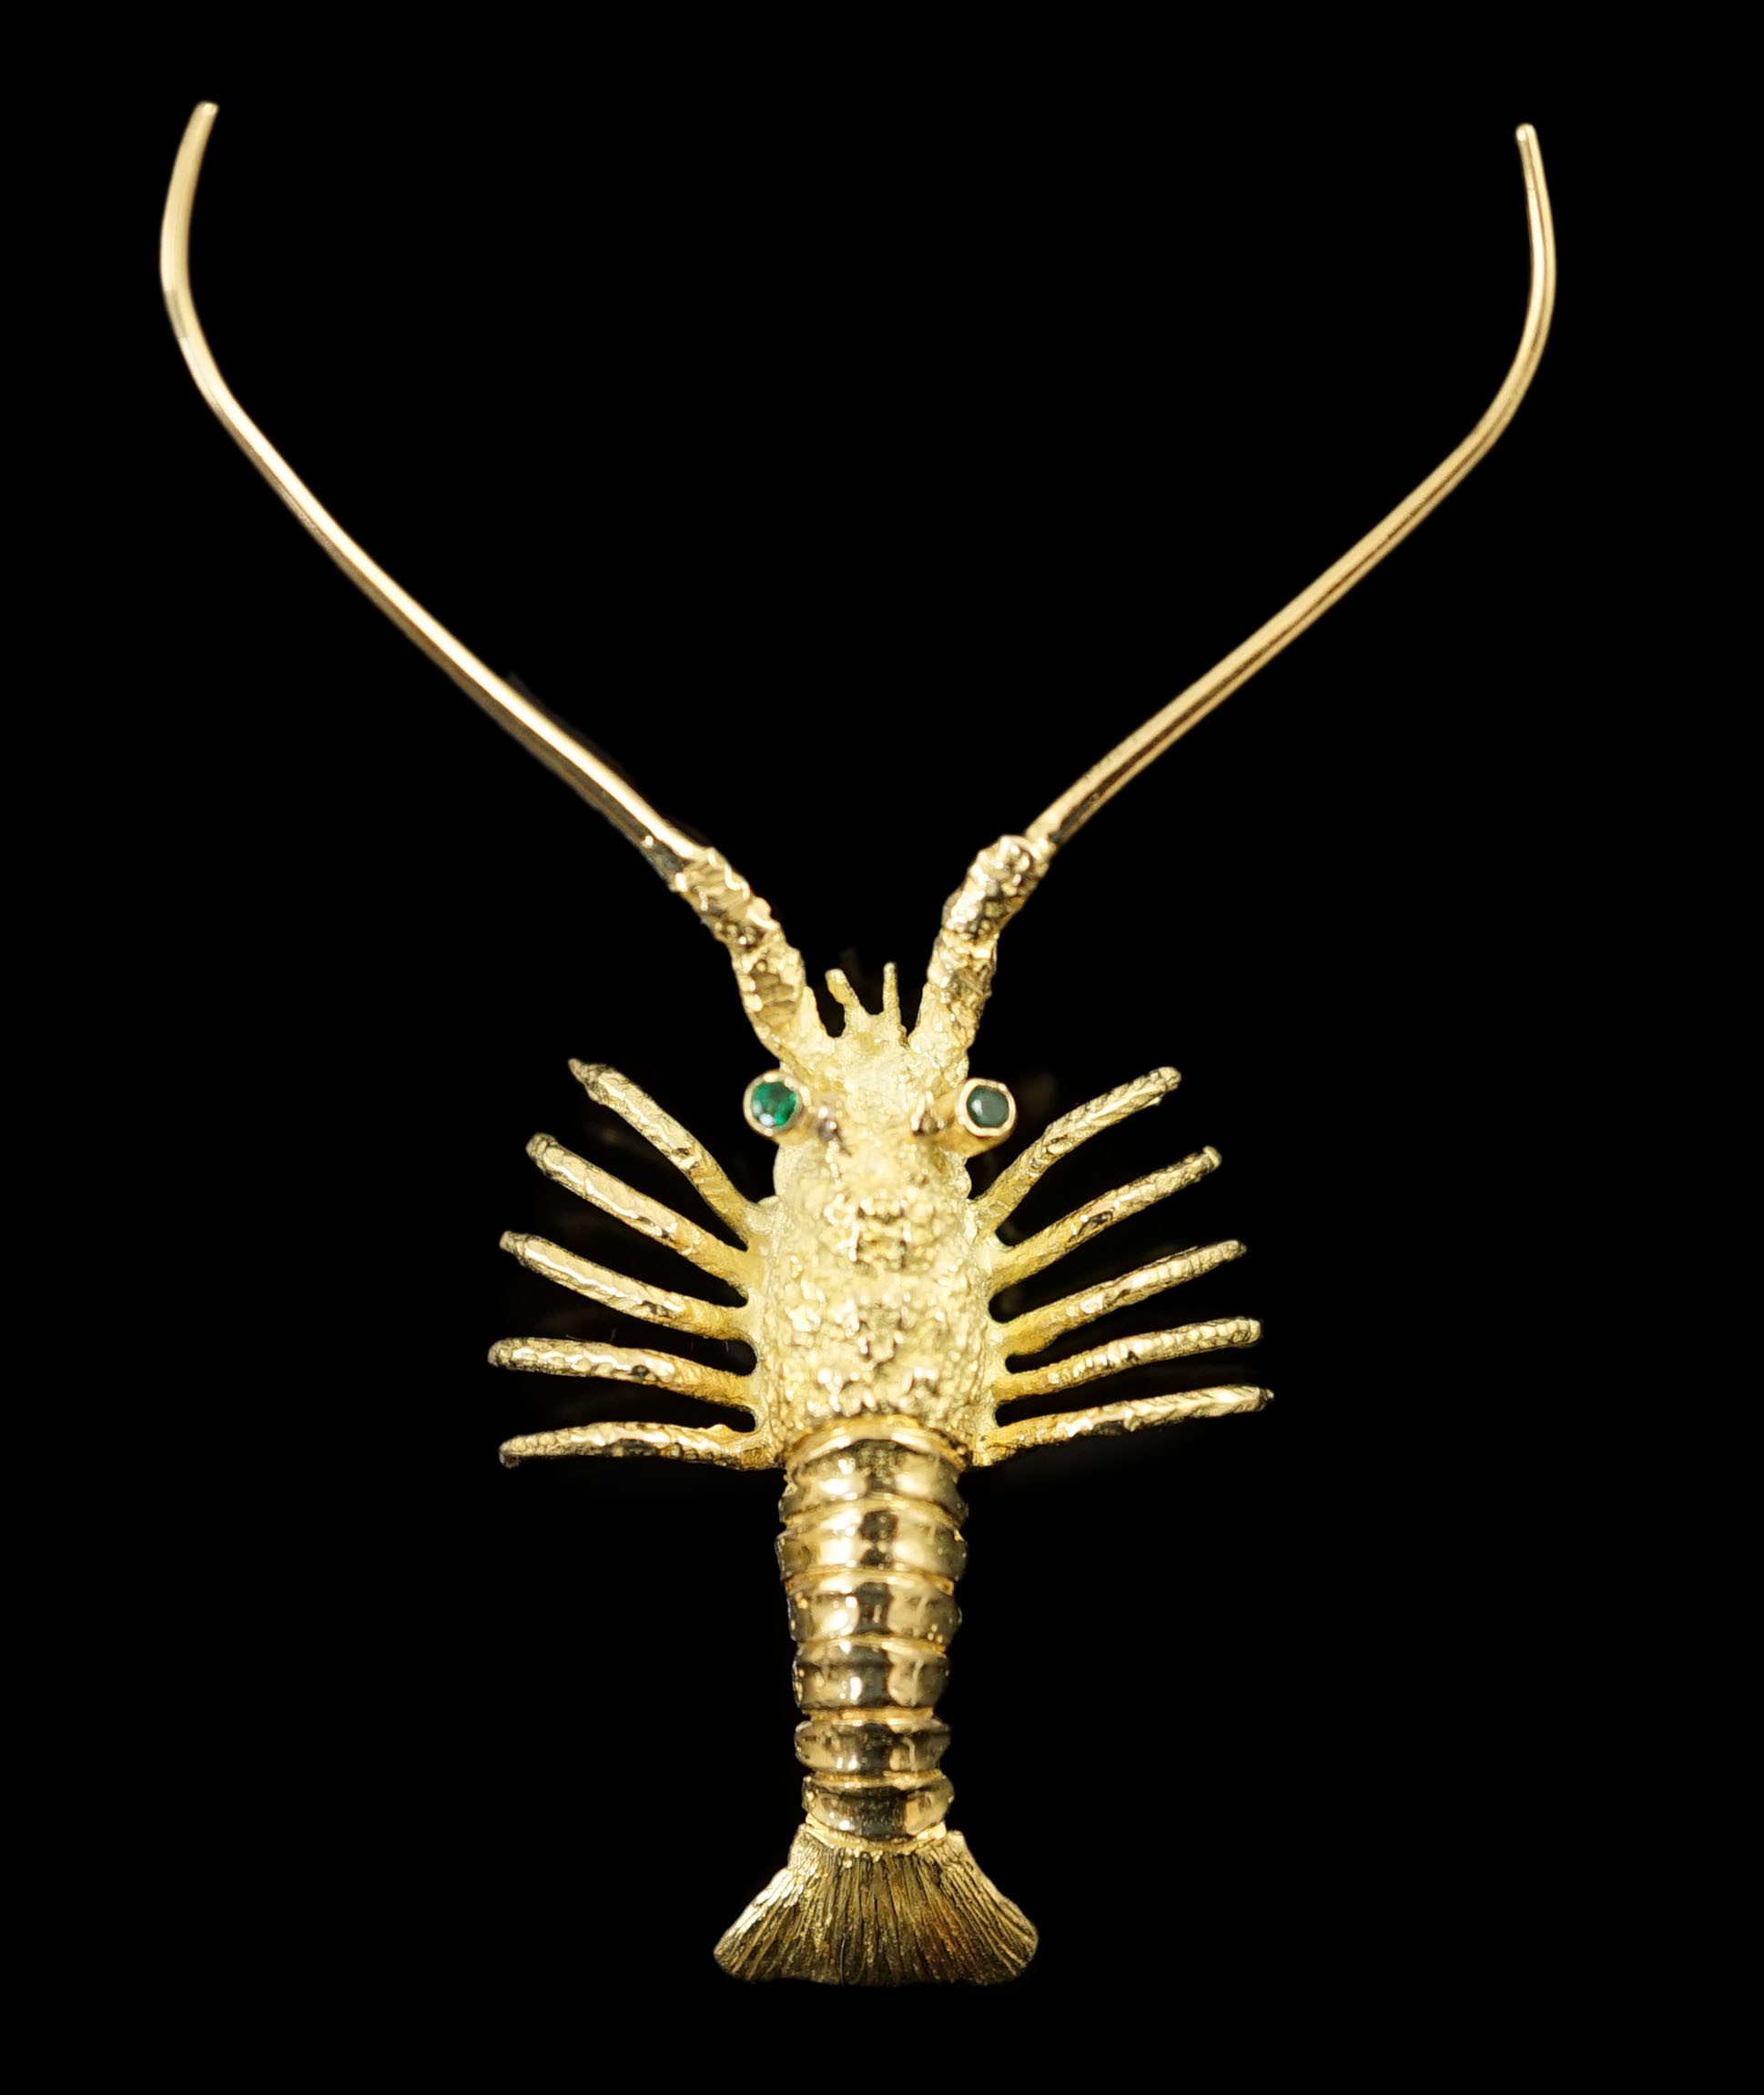 An Astwood Dickinson 18ct gold lobster brooch